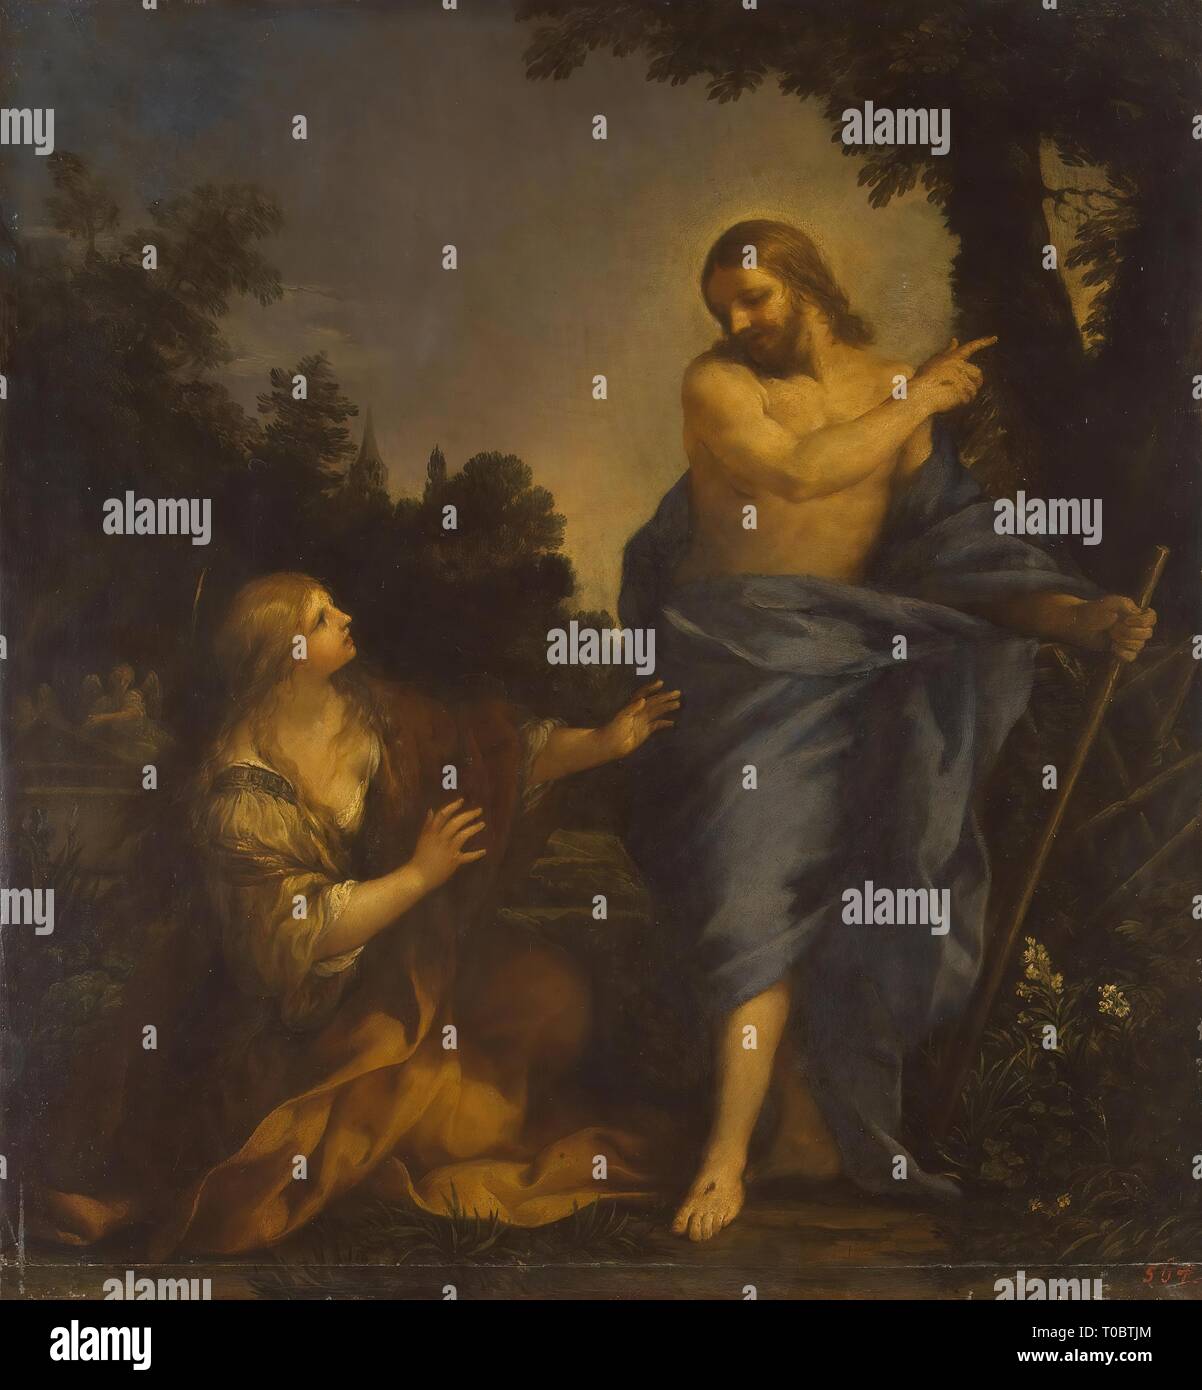 'Christ Appearing to Mary Magdalene'. Italy, Between 1640 and 1650. Dimensions: 55x50,5 cm. Museum: State Hermitage, St. Petersburg. Author: Pietro da Cortona (Pietro Berrettini). Stock Photo